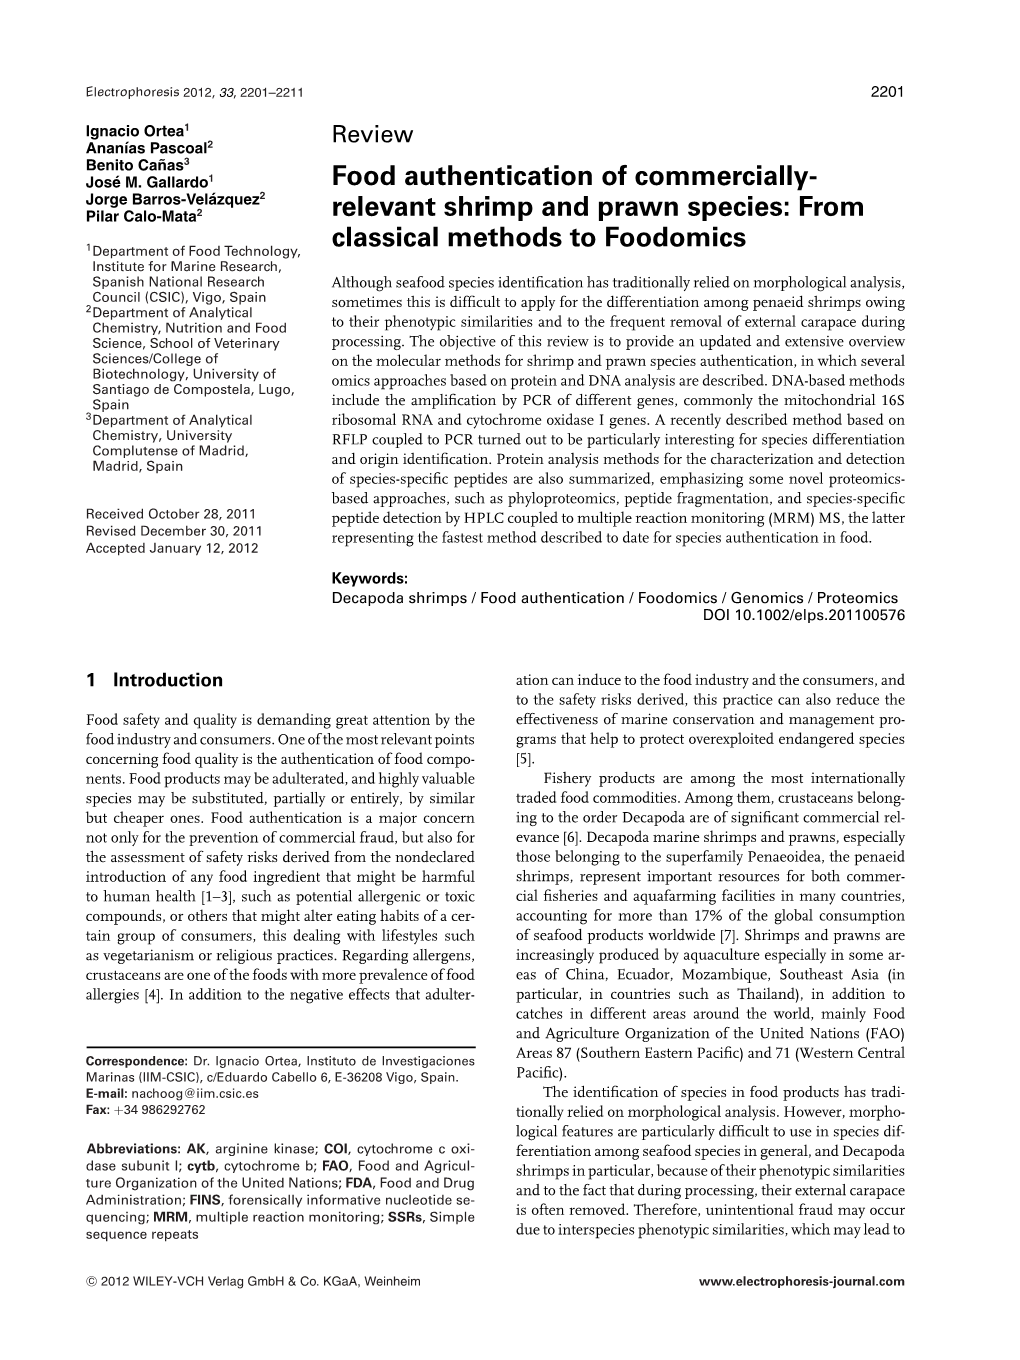 Food Authentification of Commercially Relevant Shrimp and Prawn Species